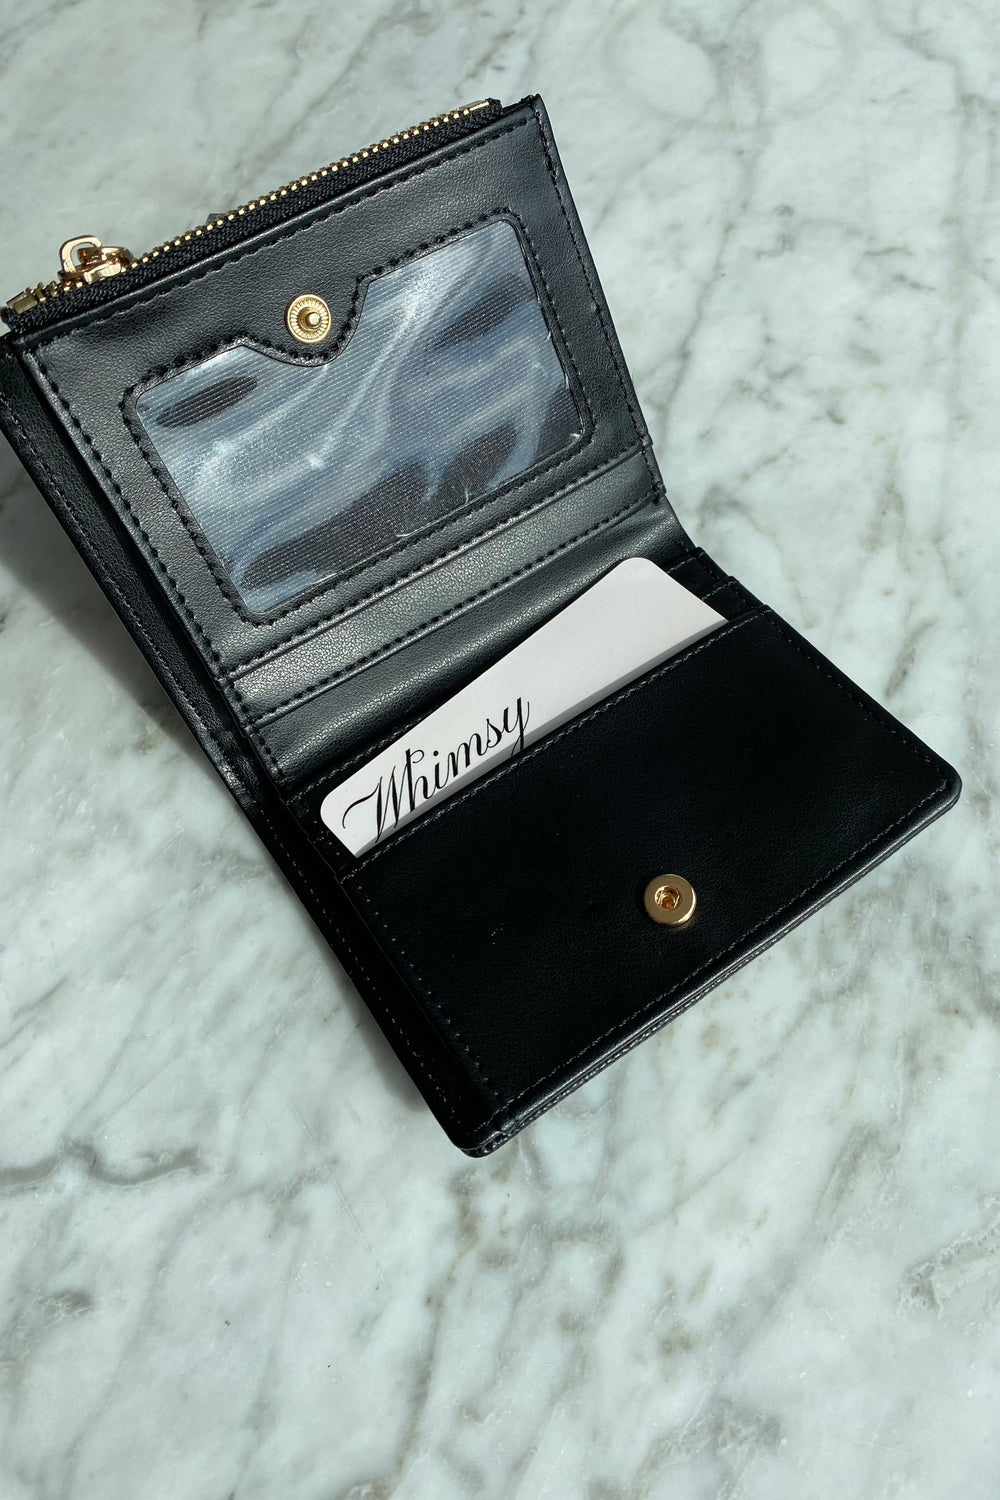 Melie Bianco Tish Wallet in Black - Whimsy & Row